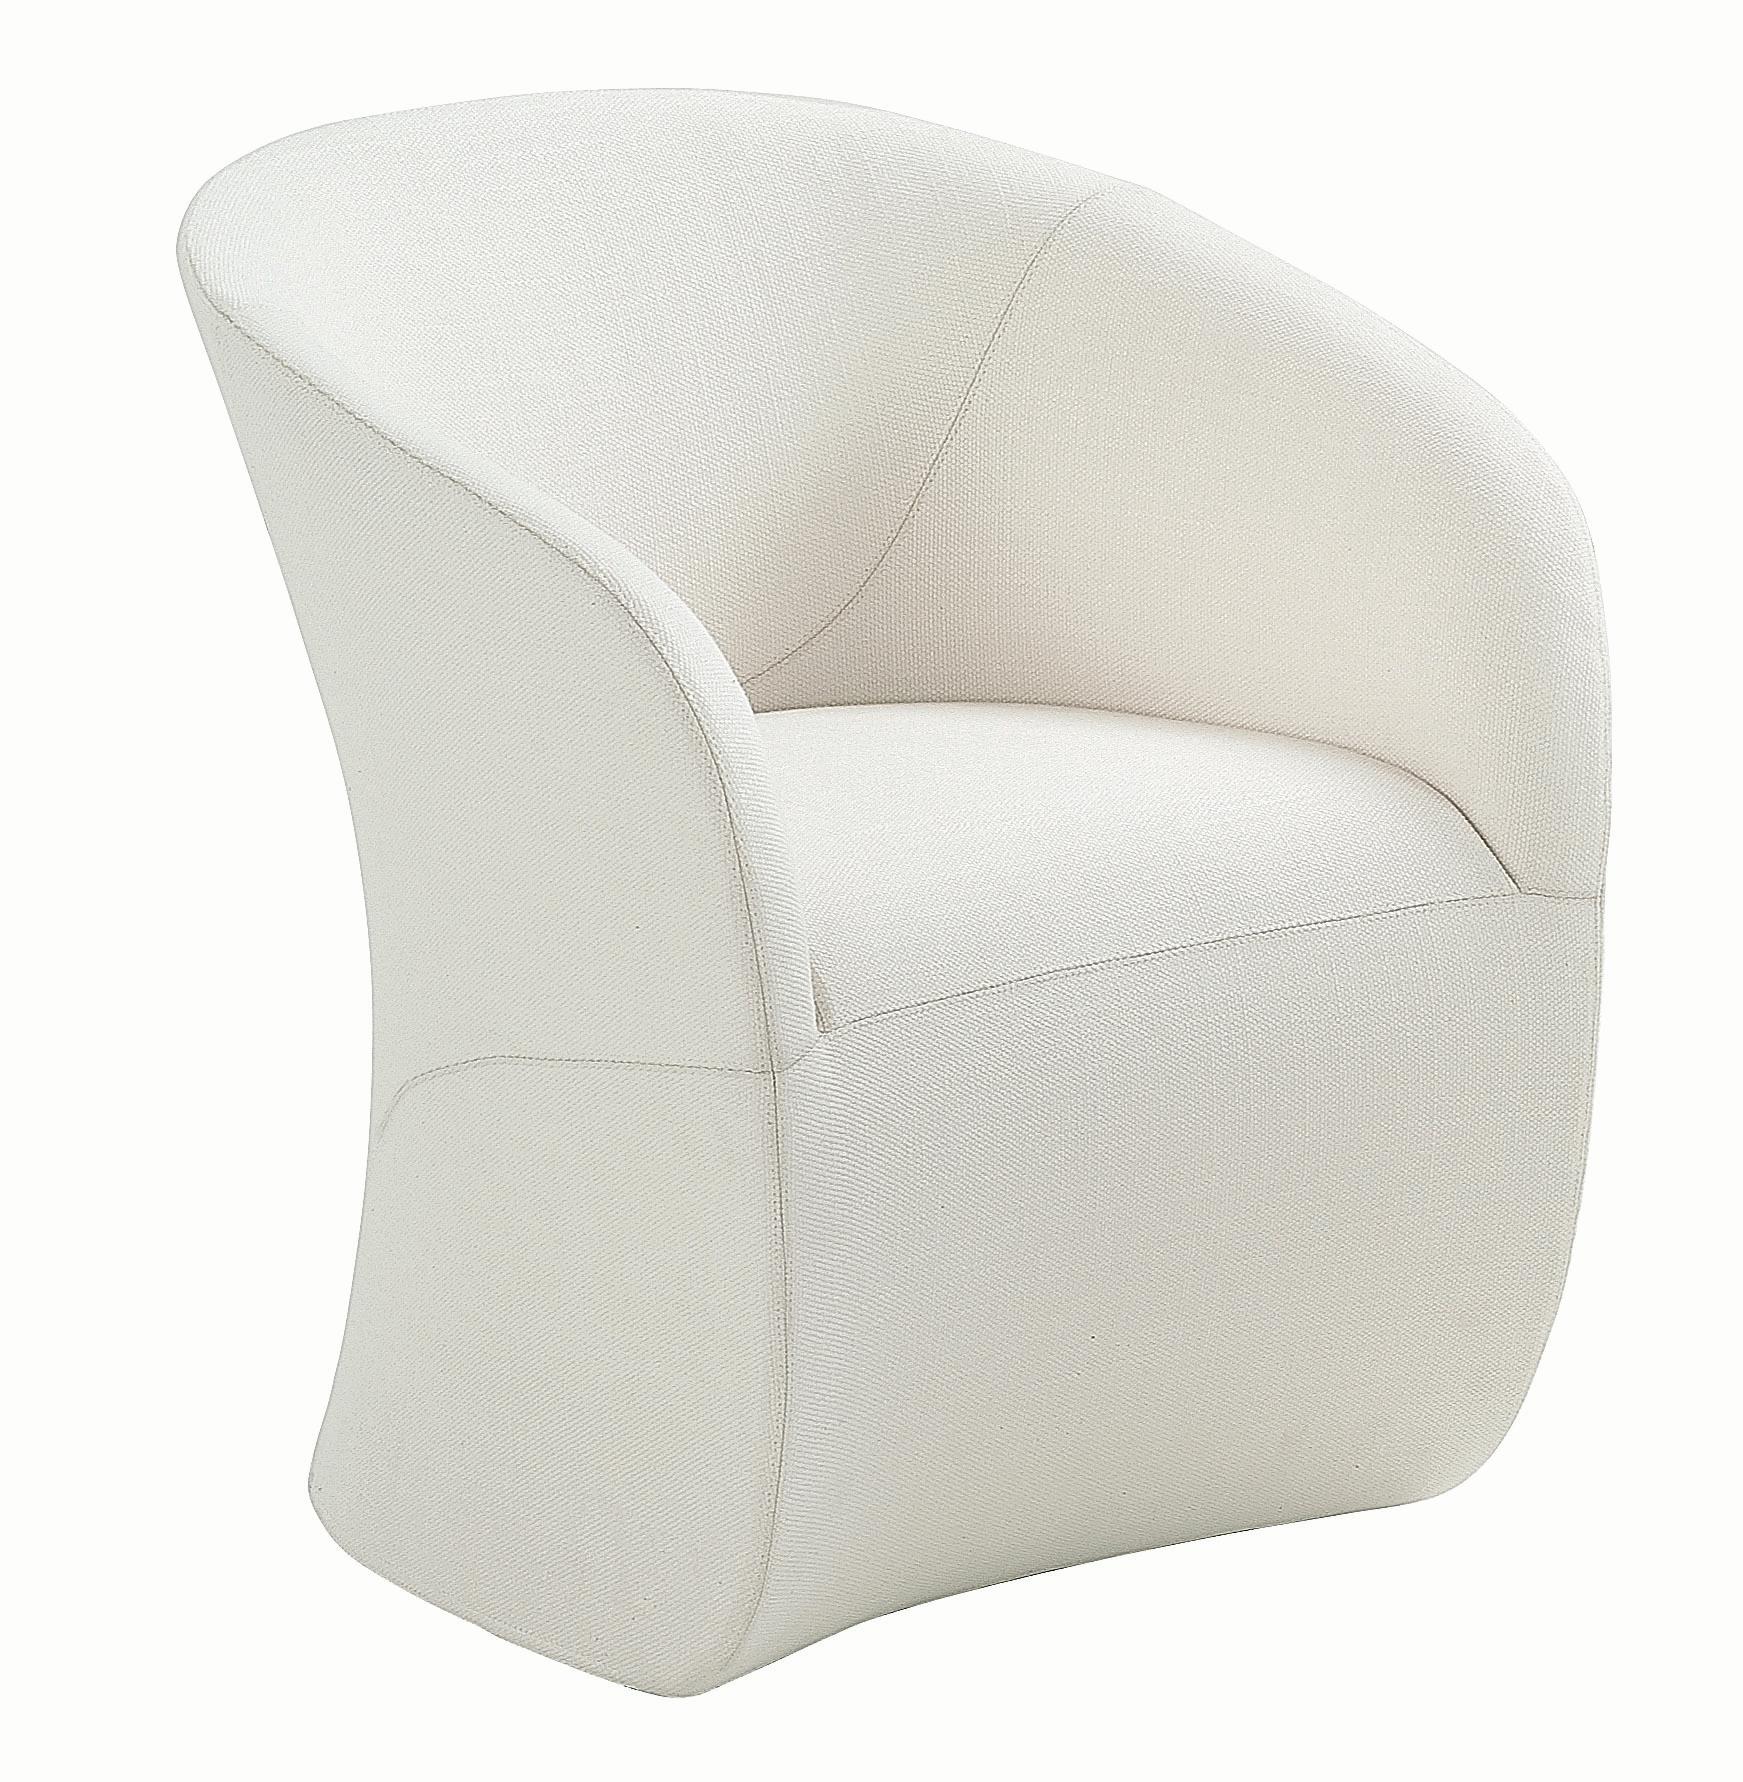 Price listed for starting fabric.
 Armchair. Steel frame. Upholstery with self-extinguishing polyurethane foam/heat-bound polyester fibre with elastic strips suspension. Fixed internal nylon cover. Removable external fabric, Pied de poule or